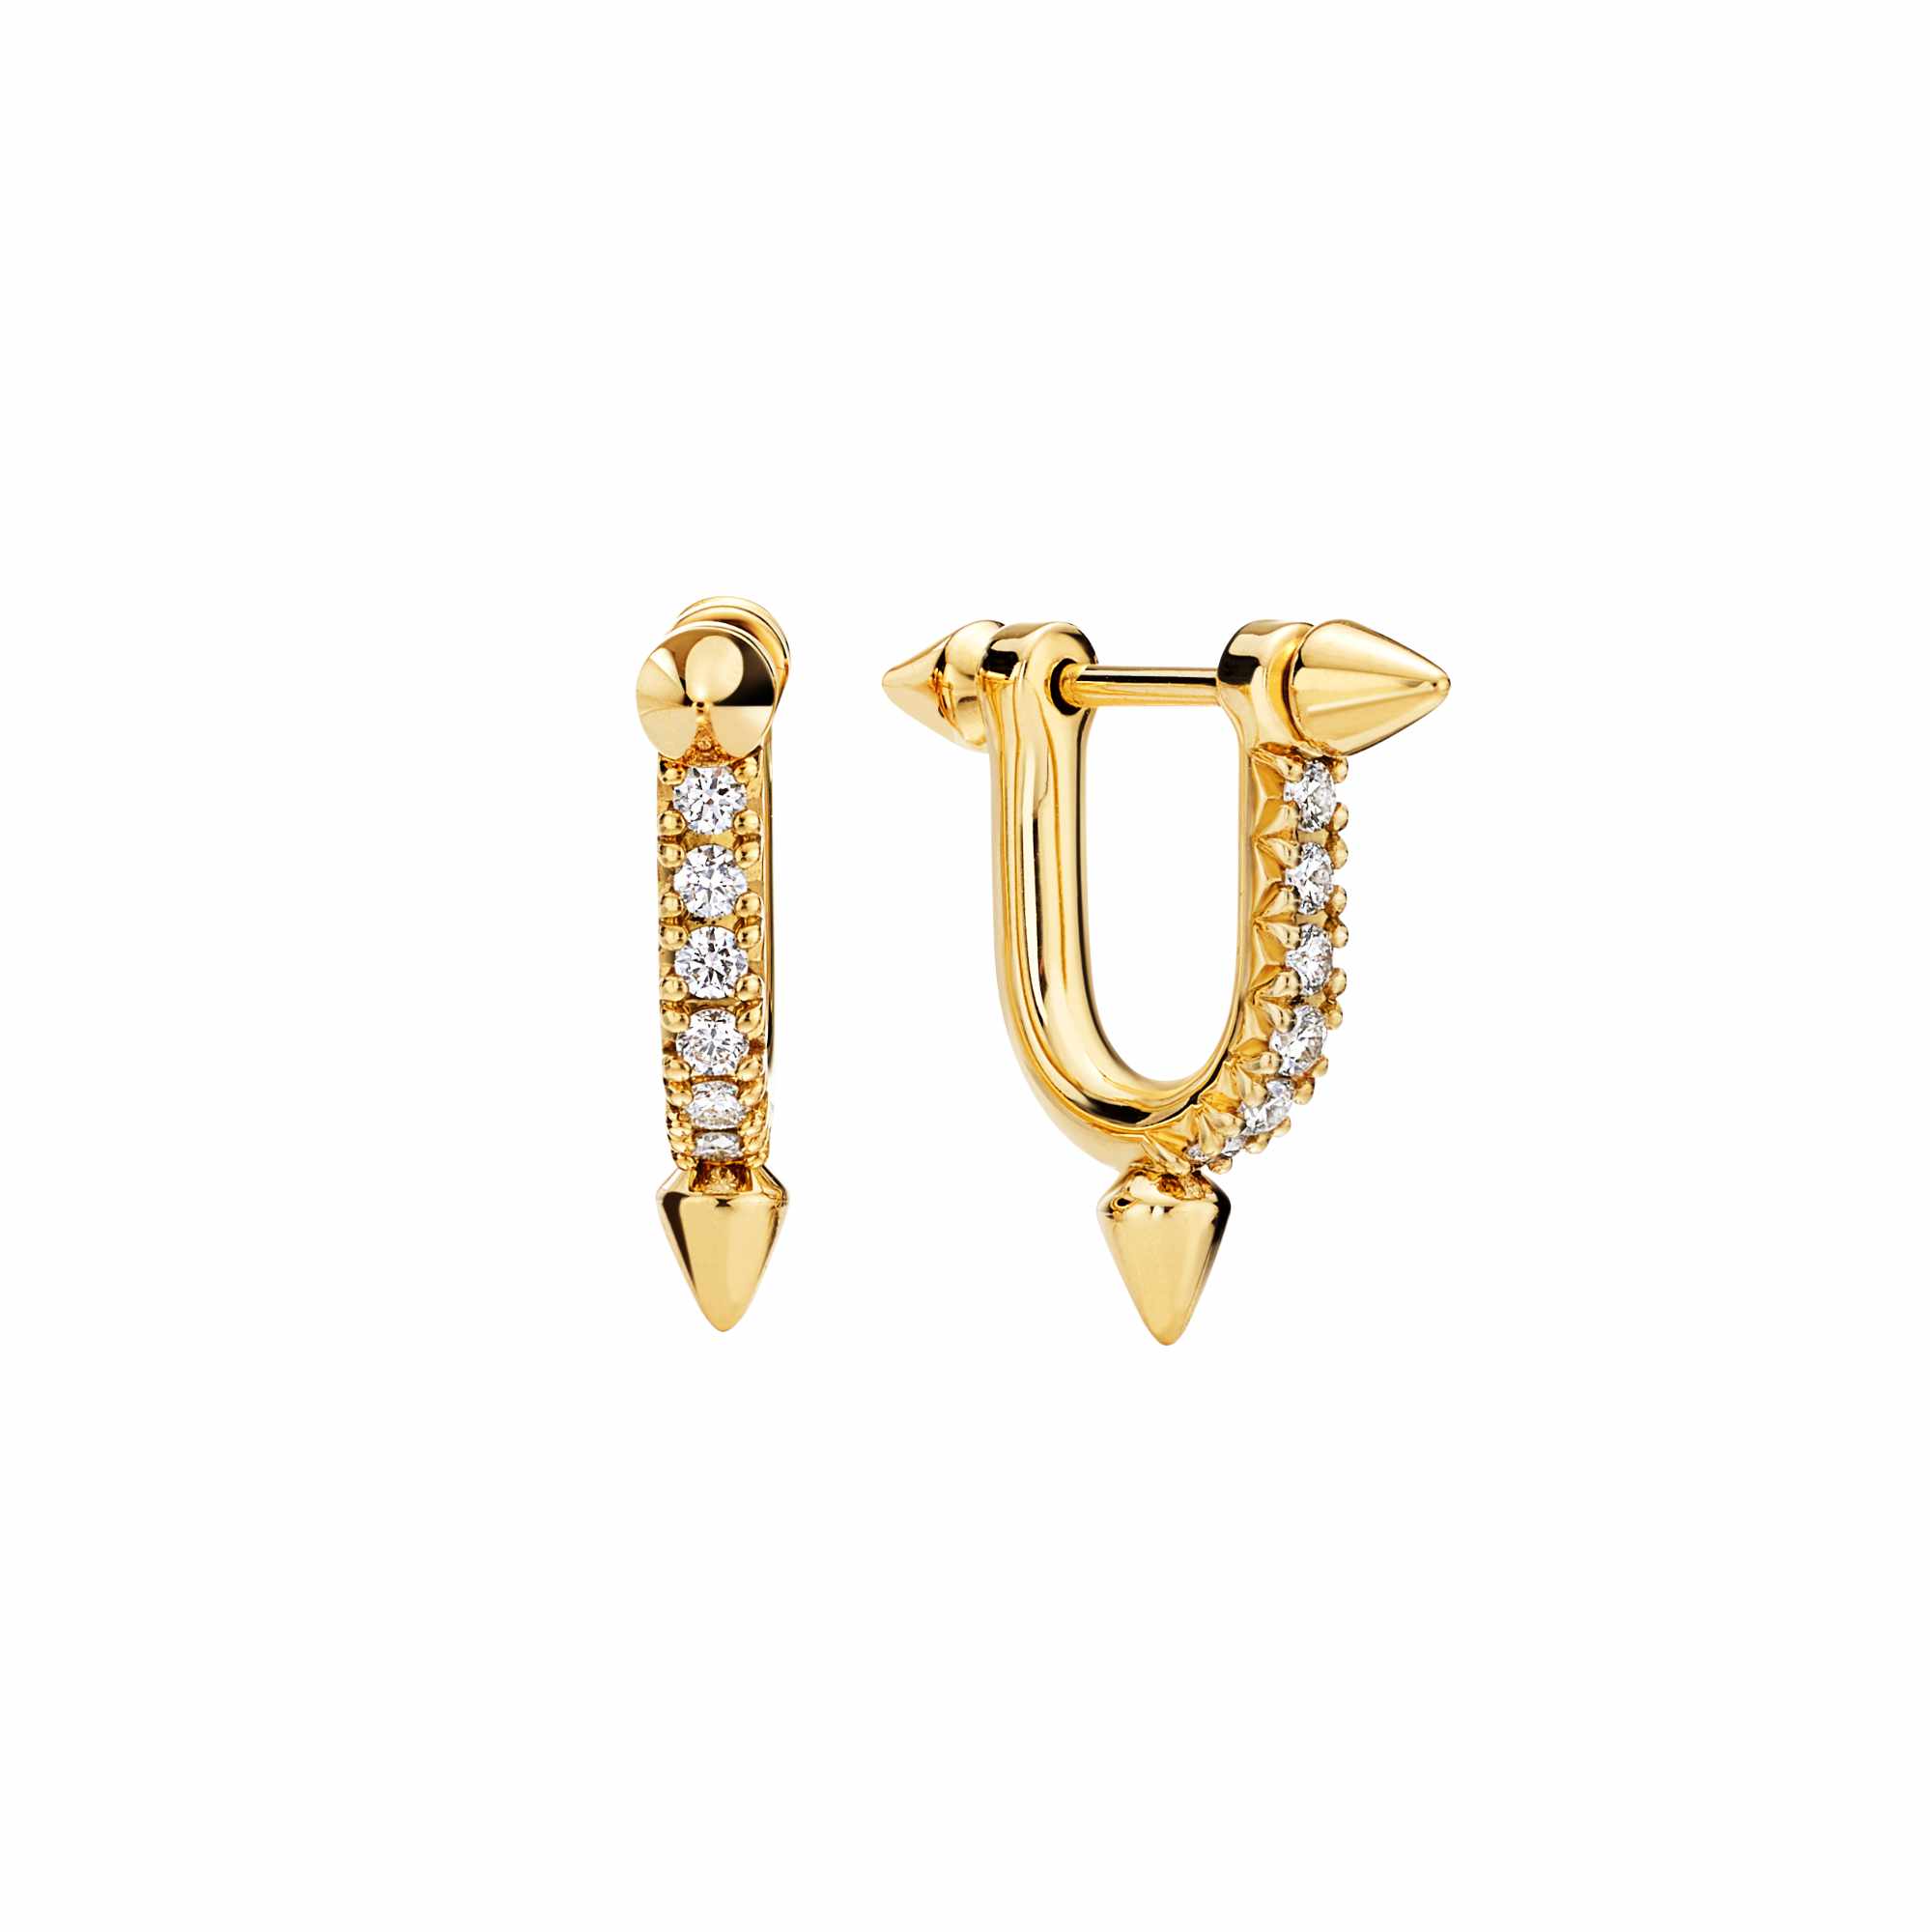 Pharrell's Tiffany Titan jewelry collection, including gold and black titanium earrings, bracelets, necklaces, and rings studded with diamonds